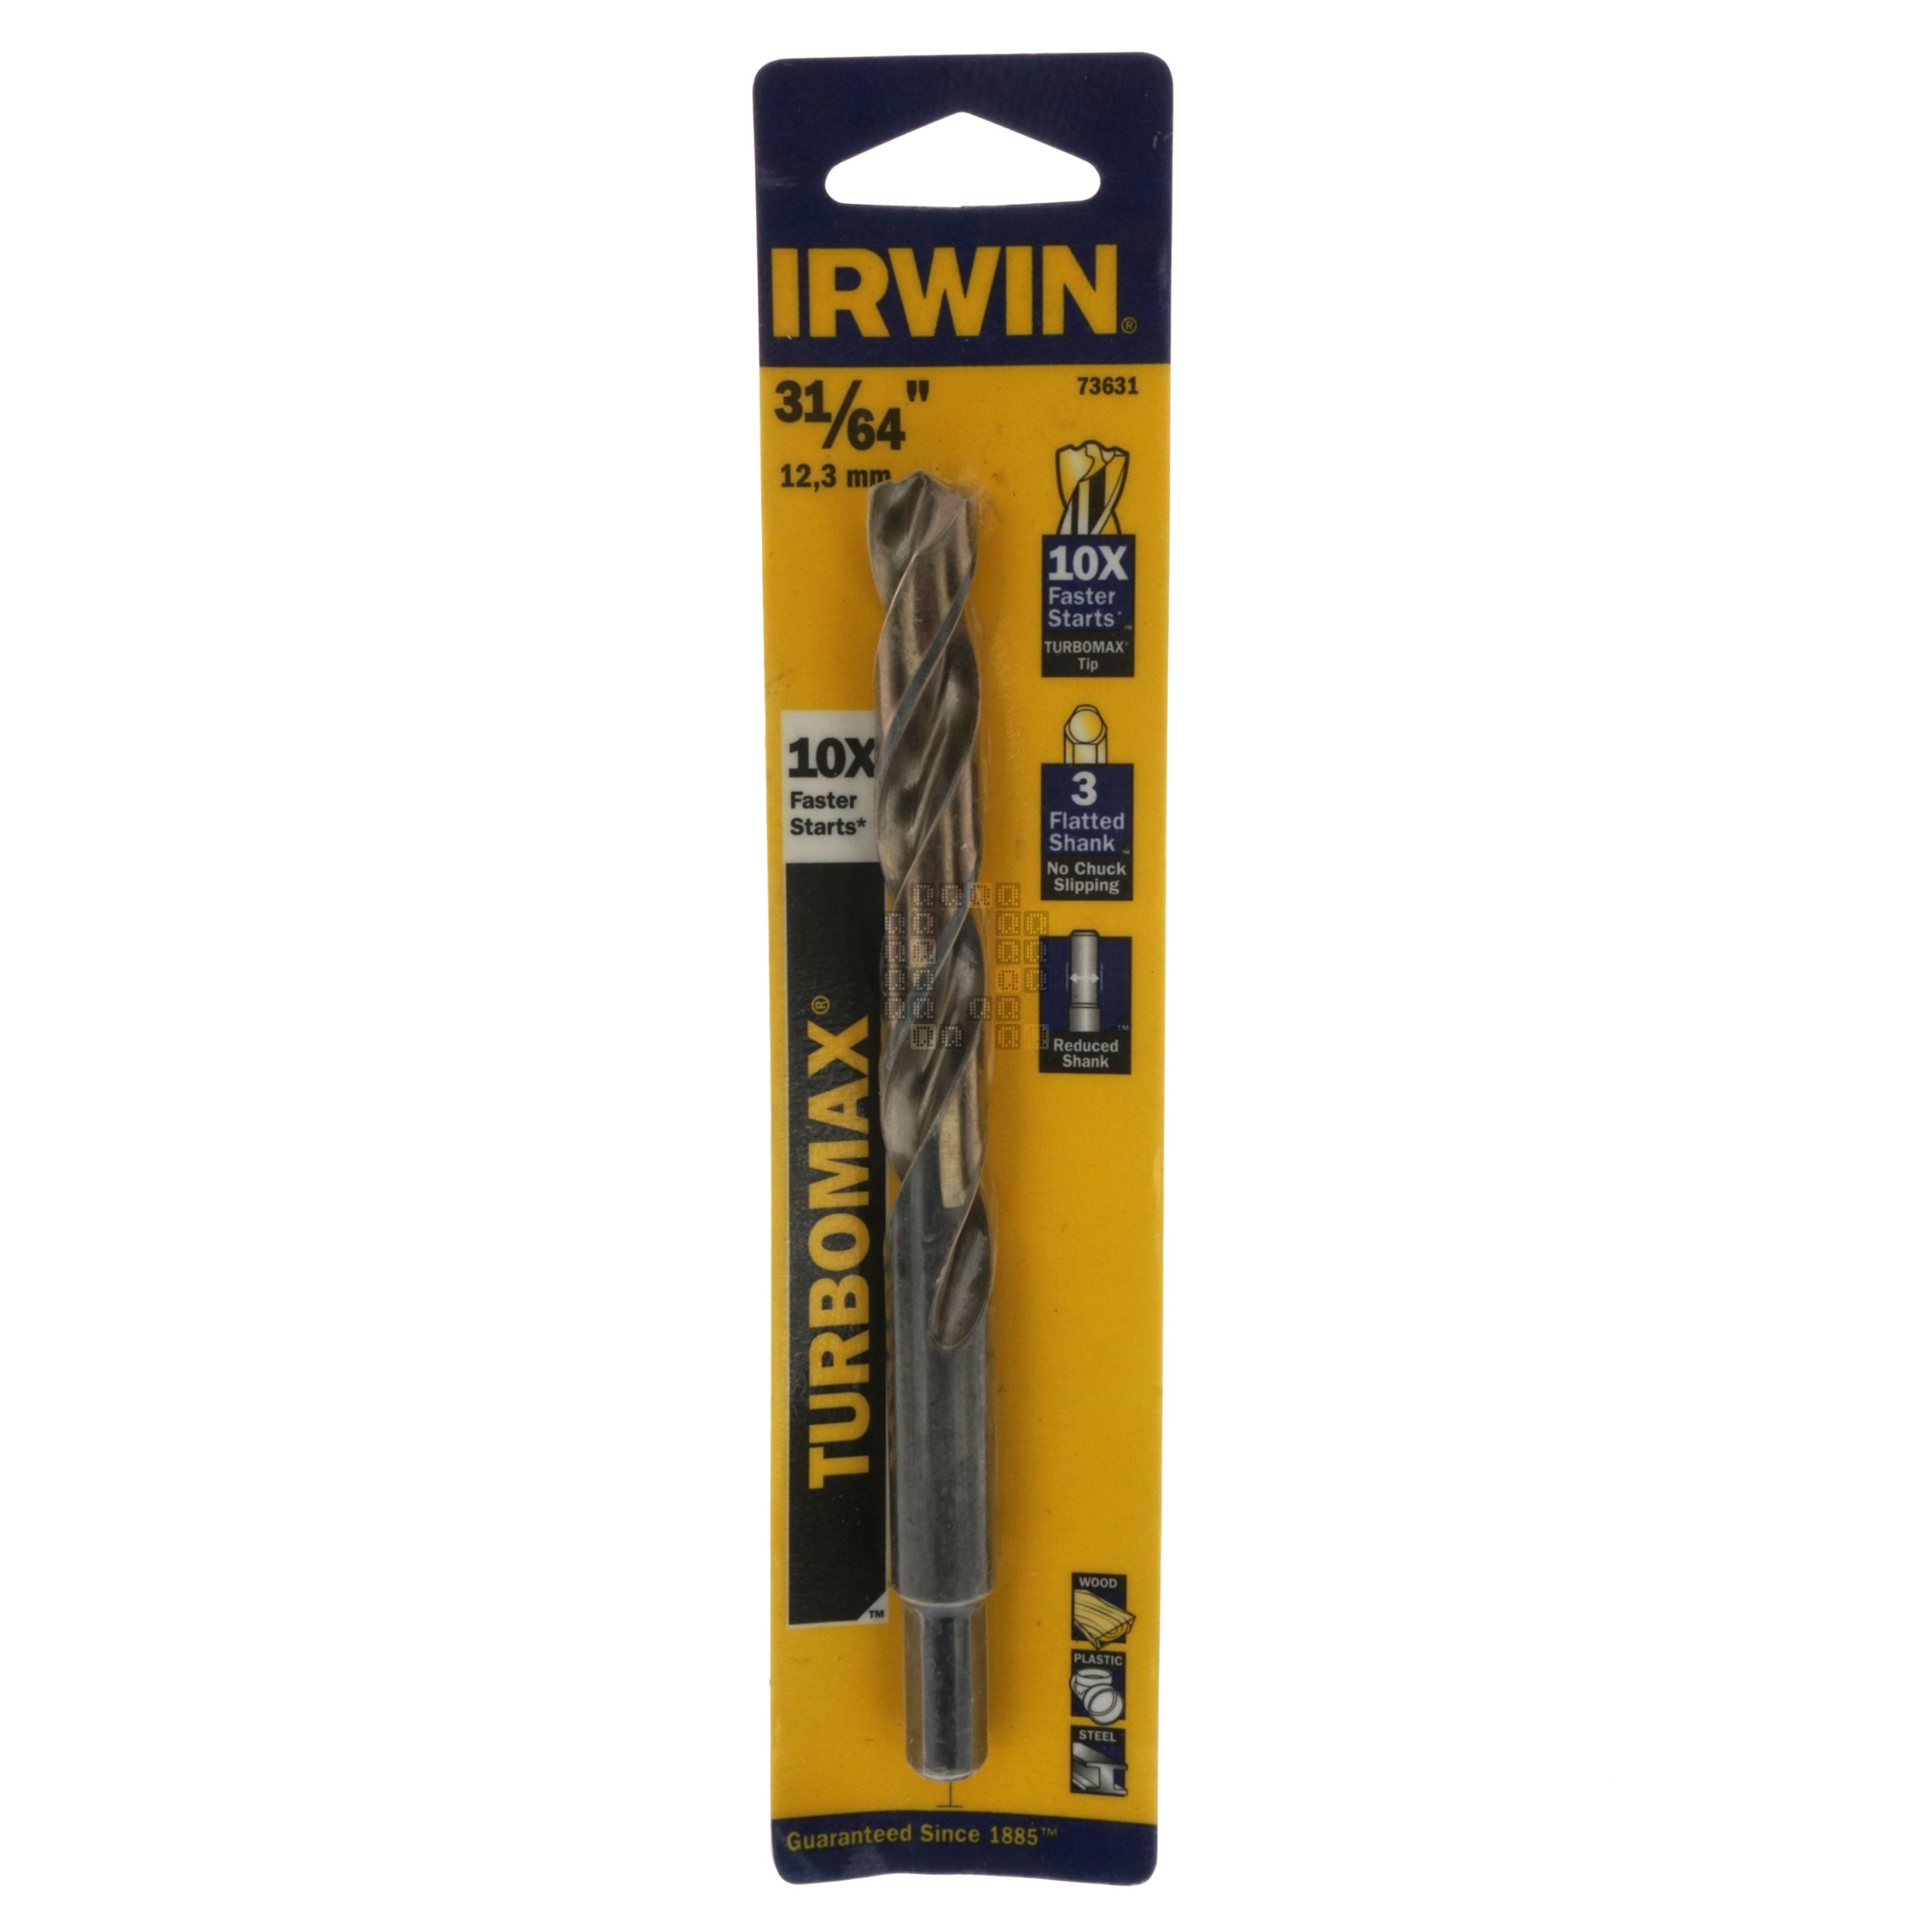 Irwin Industrial Tools 73631 TURBOMAX 31/64" Drill Bit with 3/8" Reduced Shank